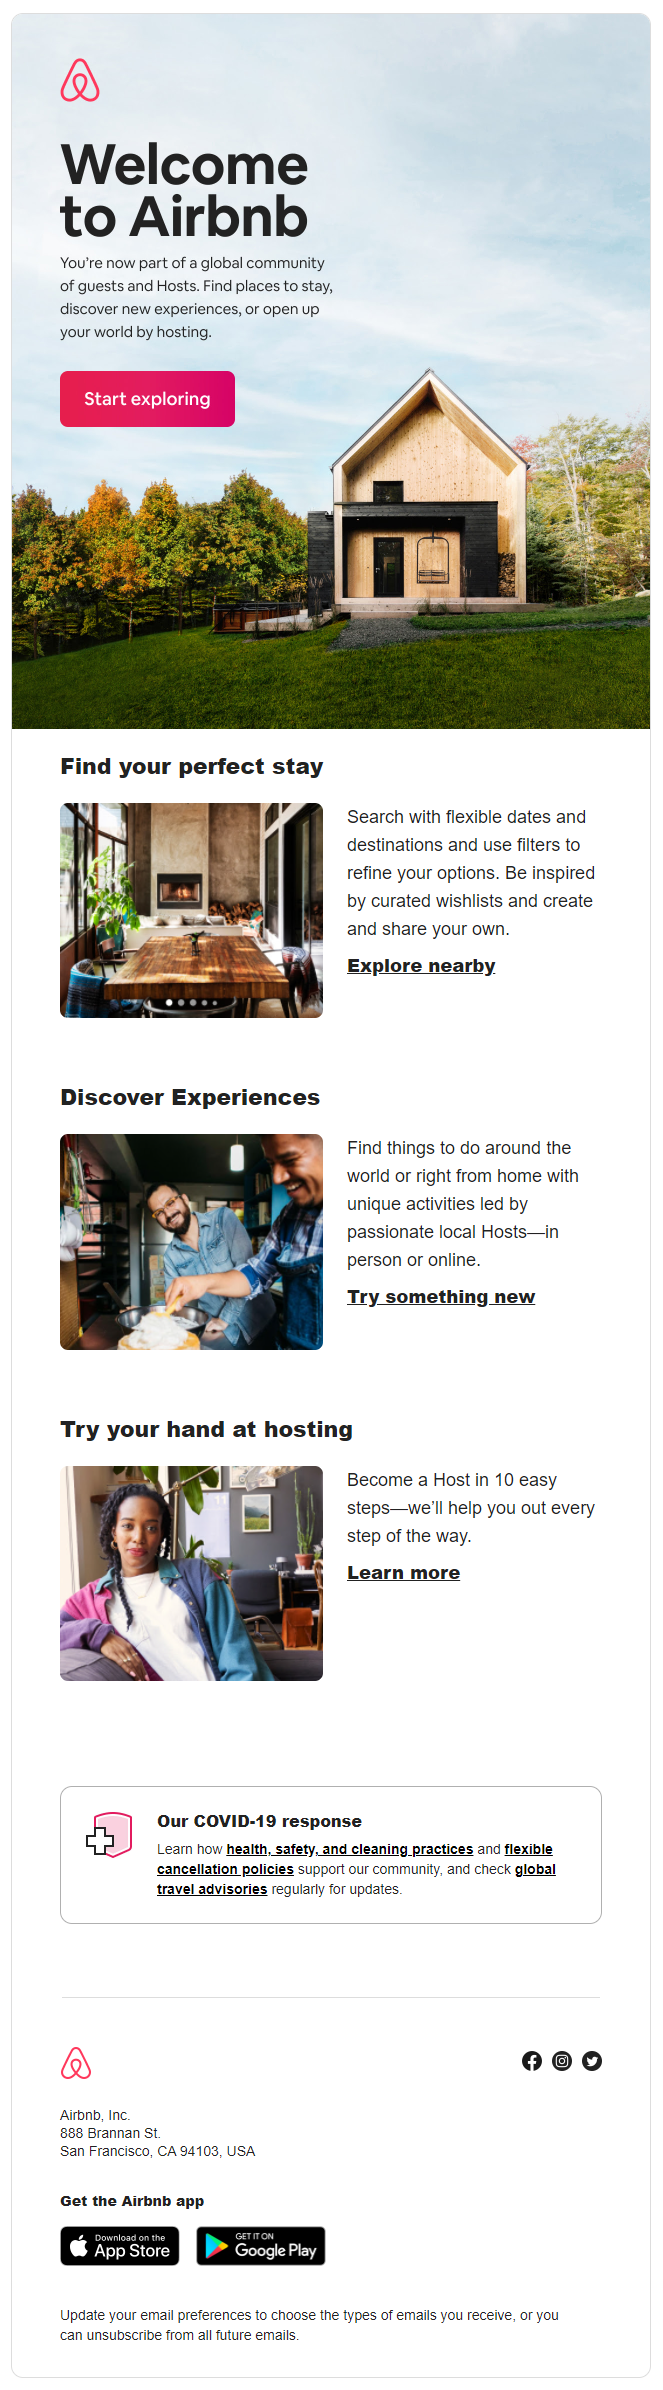 Welcome email by Airbnb